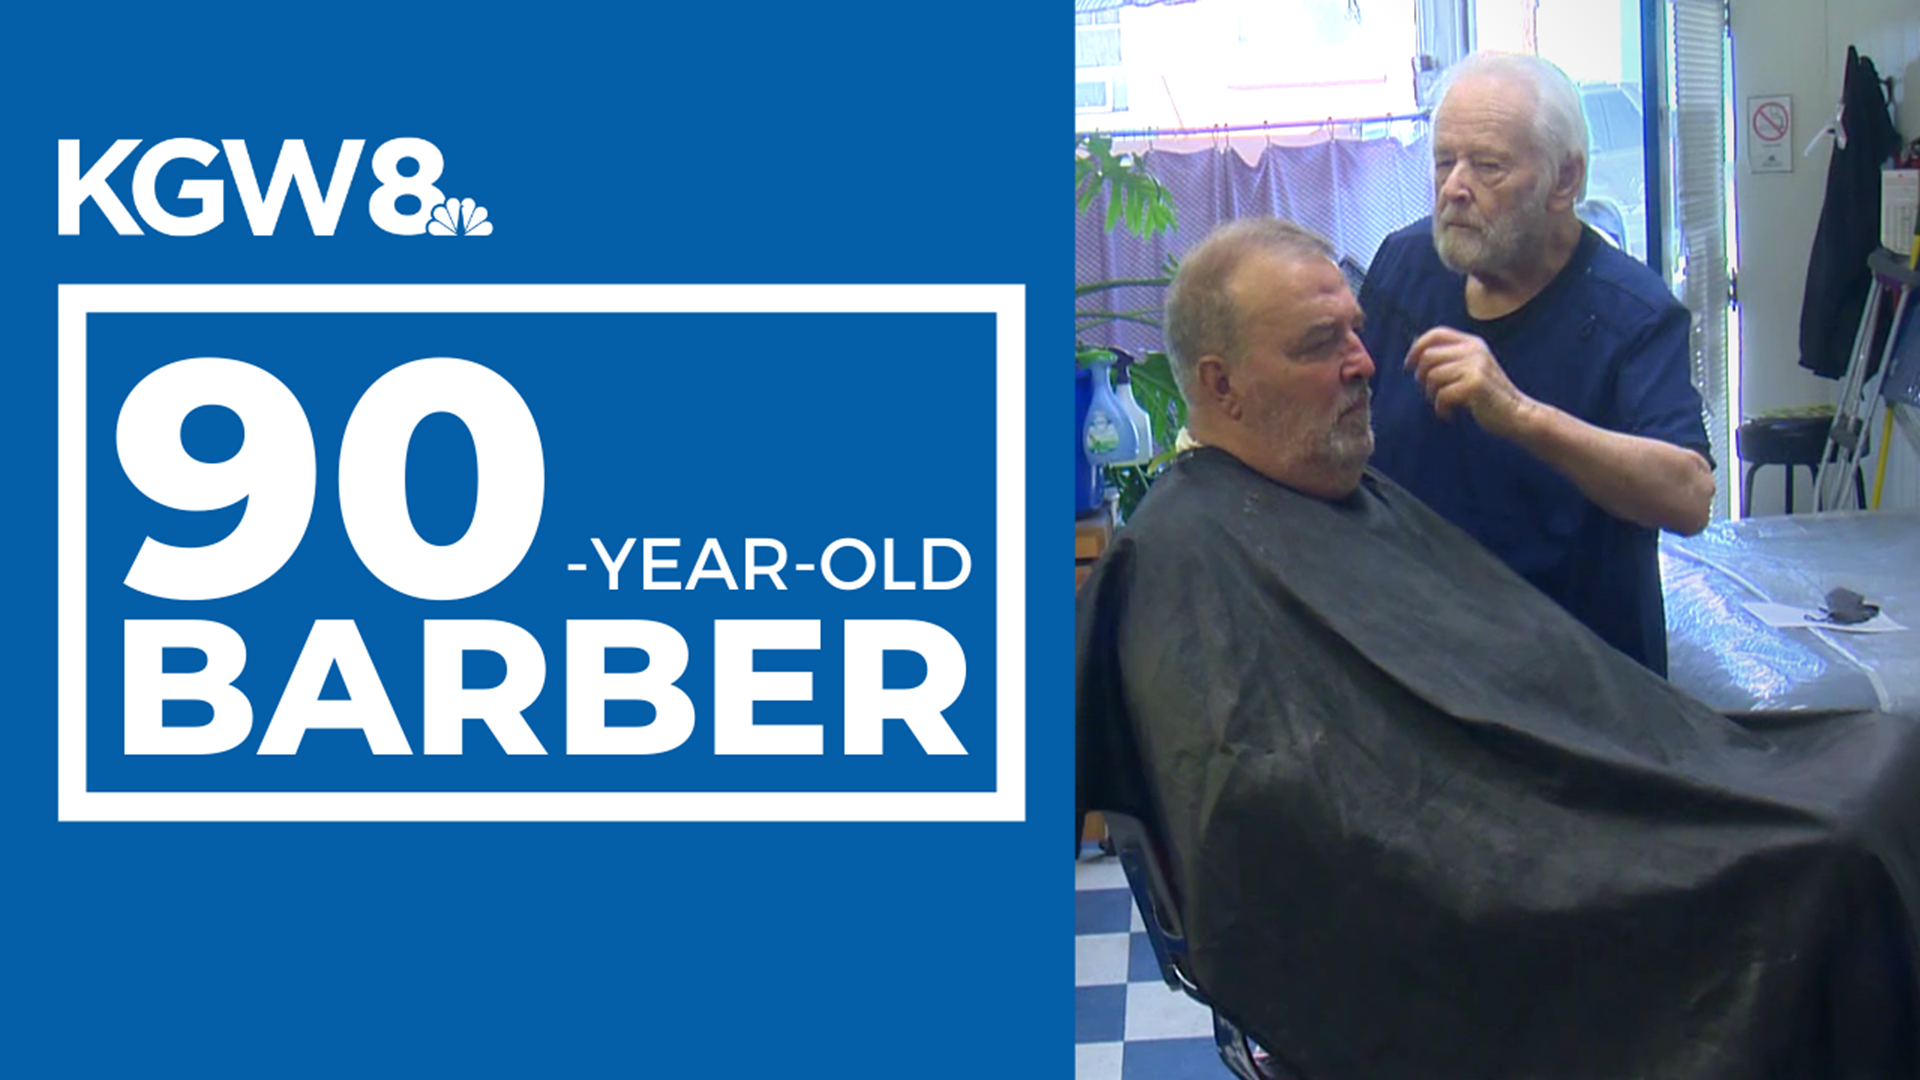 Local barber Ivan Tadic, a.k.a. 'Ivan the Hairable,' is celebrating his 90th birthday tomorrow. He's been cutting hair in Multnomah Village since 1949.